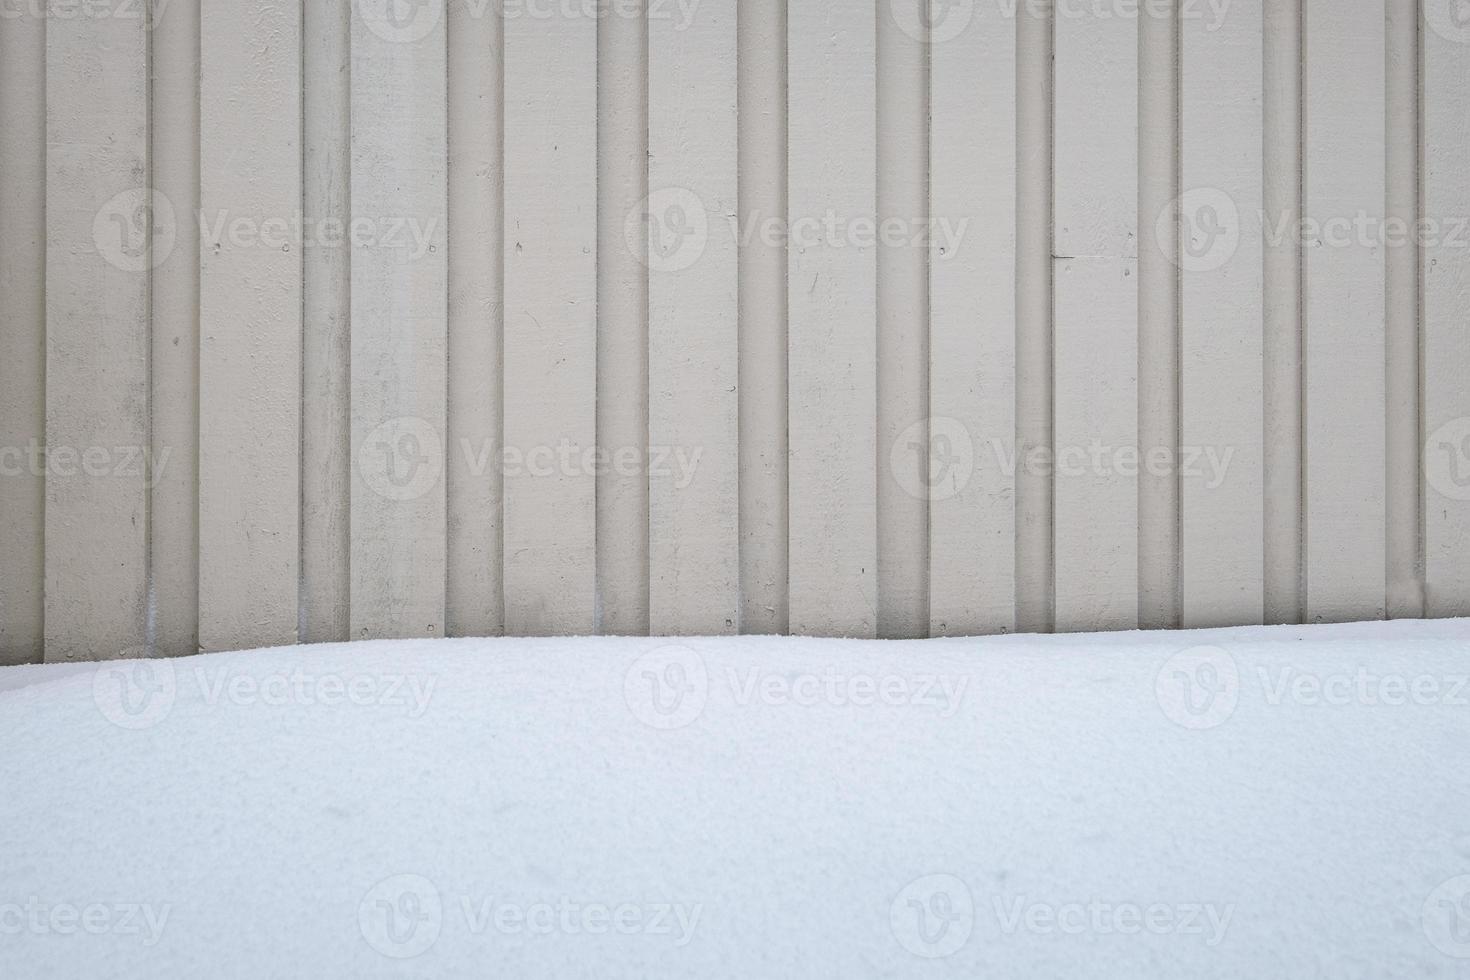 Wooden striped wall with snow covered photo